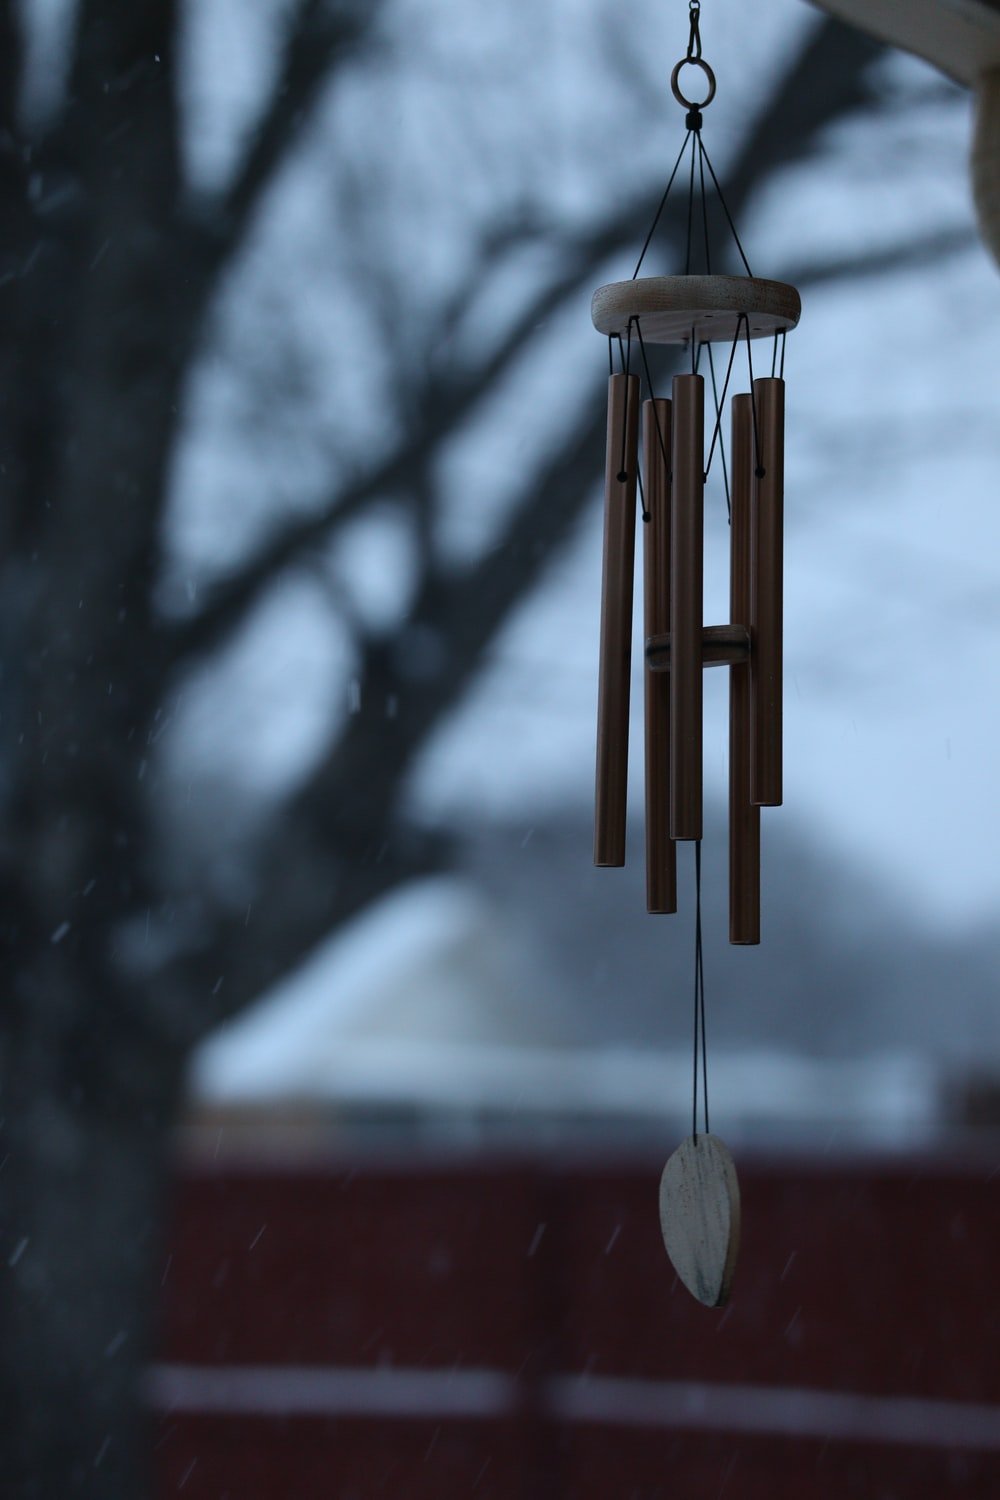 Wind Chimes Picture. Download Free Image